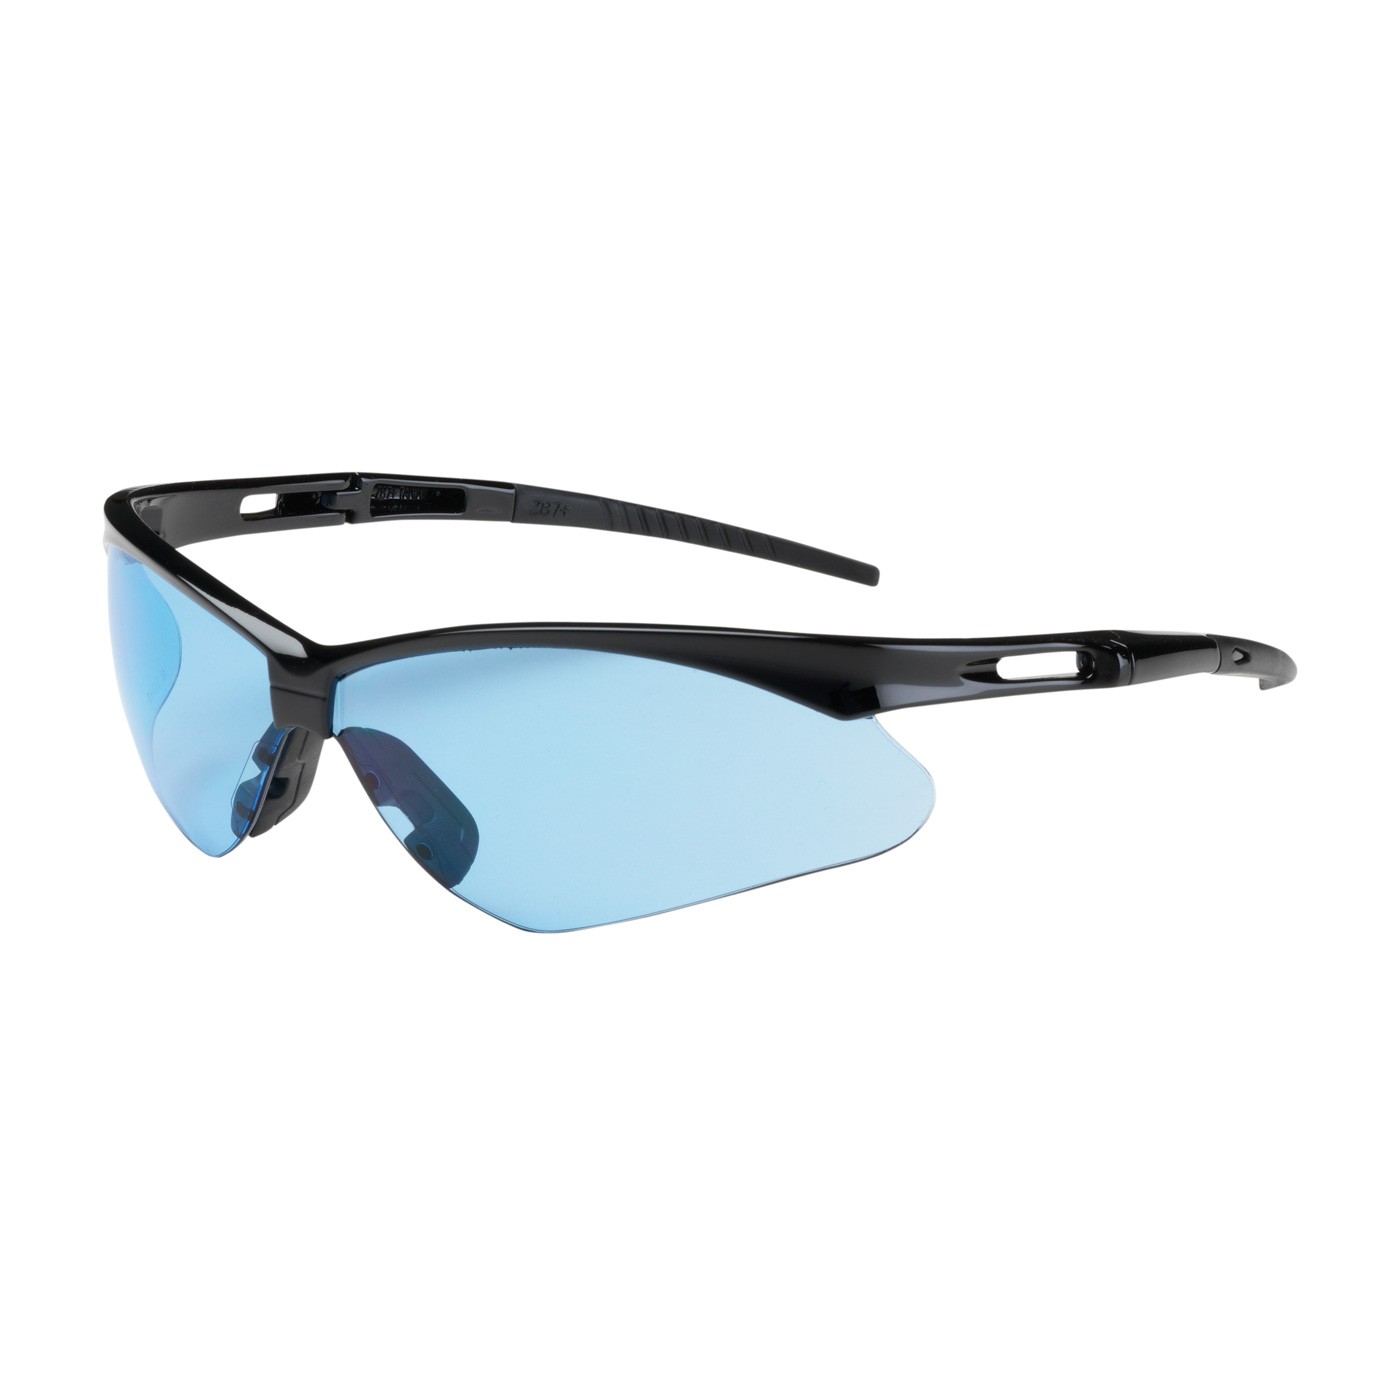 Anser™ Semi-Rimless Safety Glasses with Black Frame, Light Blue Lens and Anti-Scratch Coating  (#250-AN-10113)